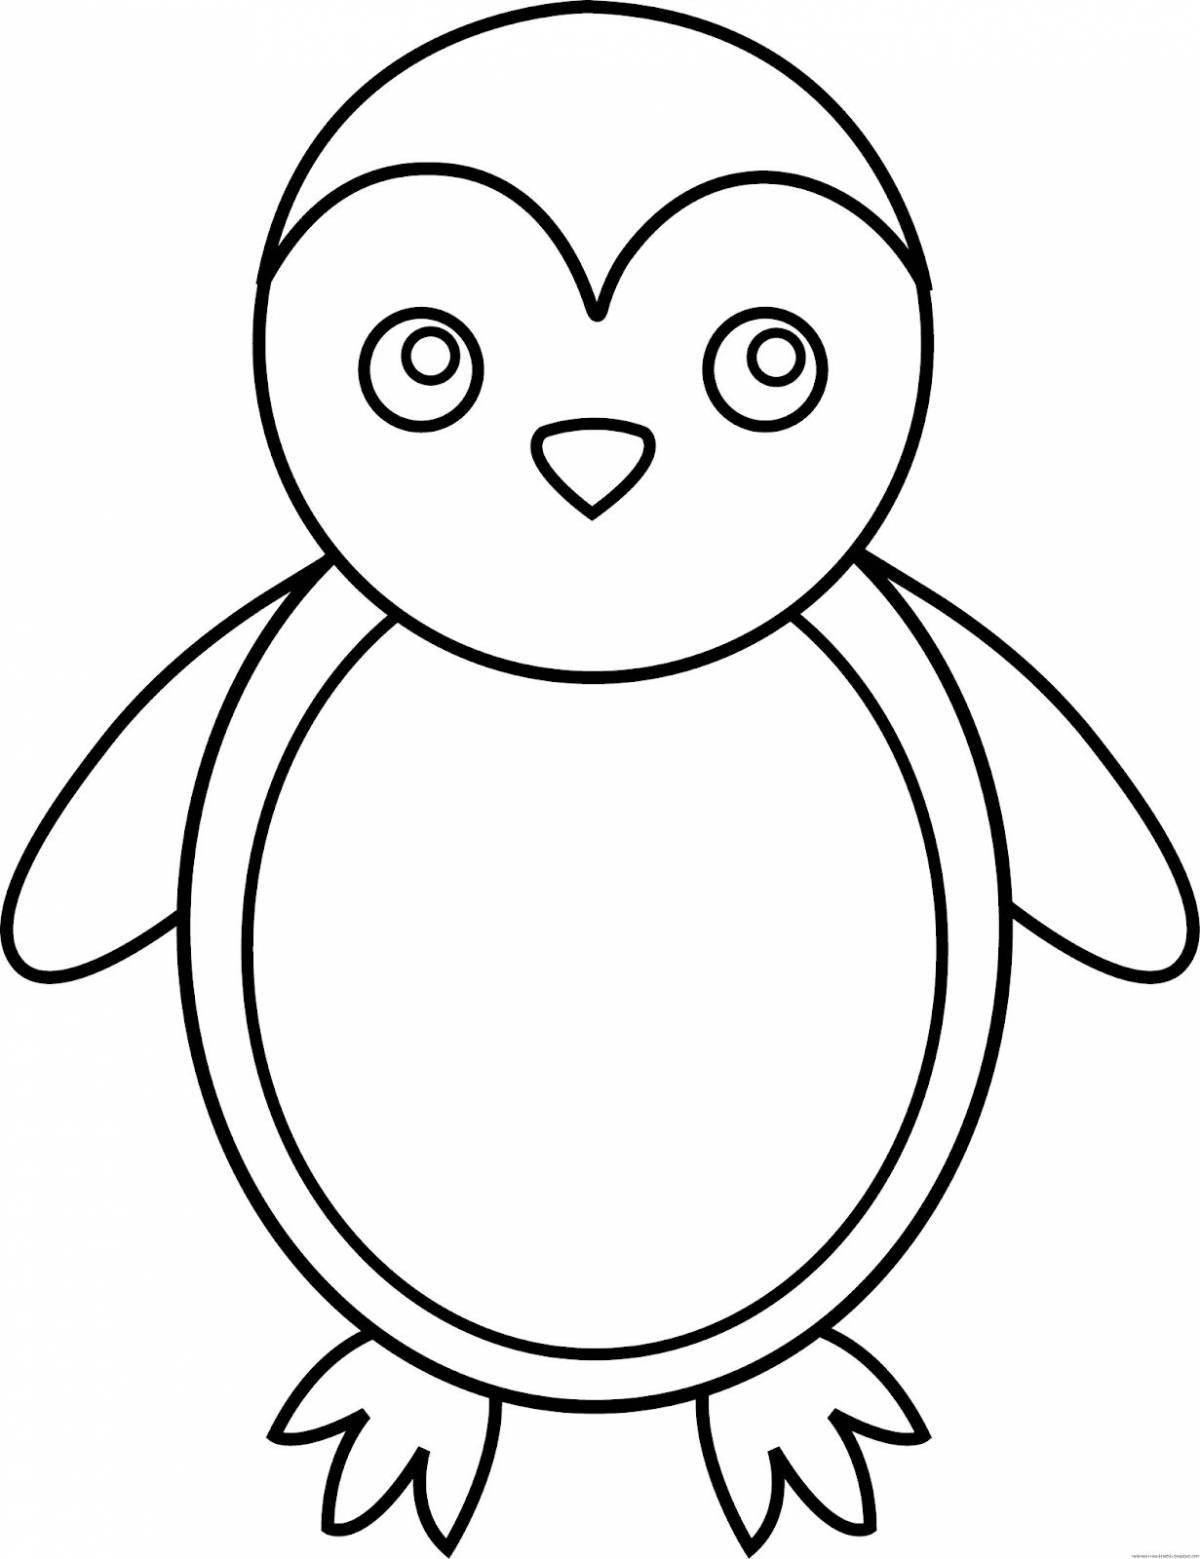 Playful penguin coloring page